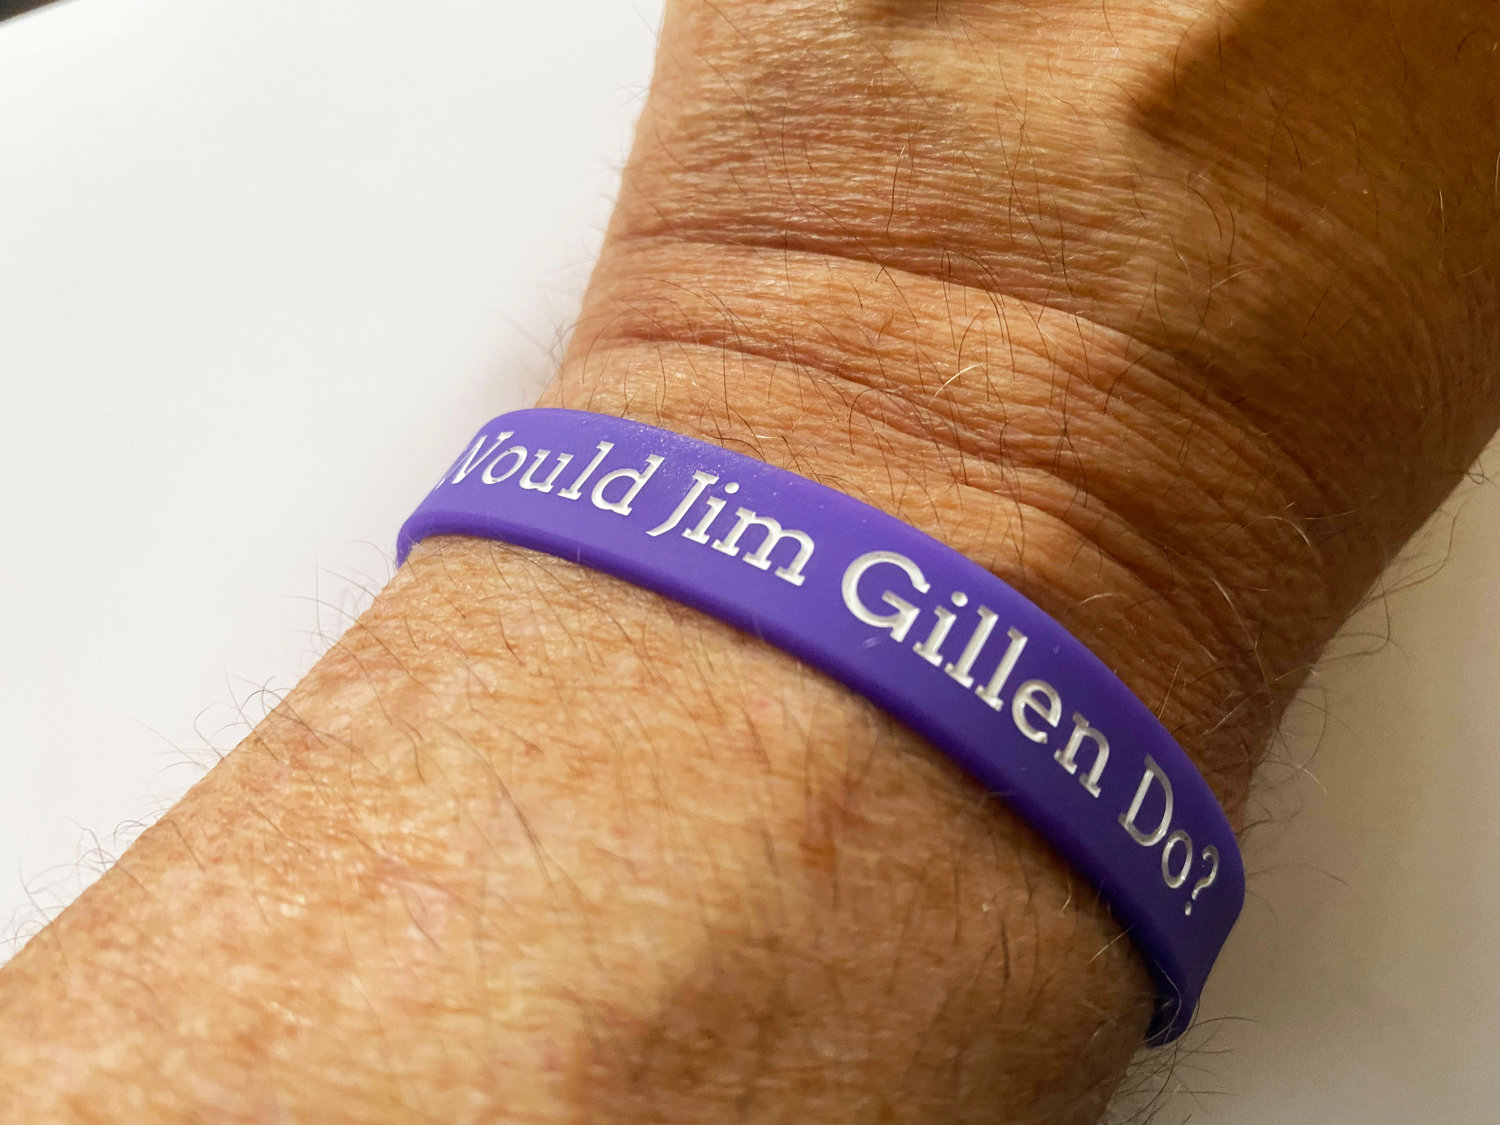 Before the Task Force meeting began on Wednesday, Sept. 8, Jonathan Goyer handed out bracelets, asking: What would Jim Gillen do? On the inside, it was written: Be the change we need.